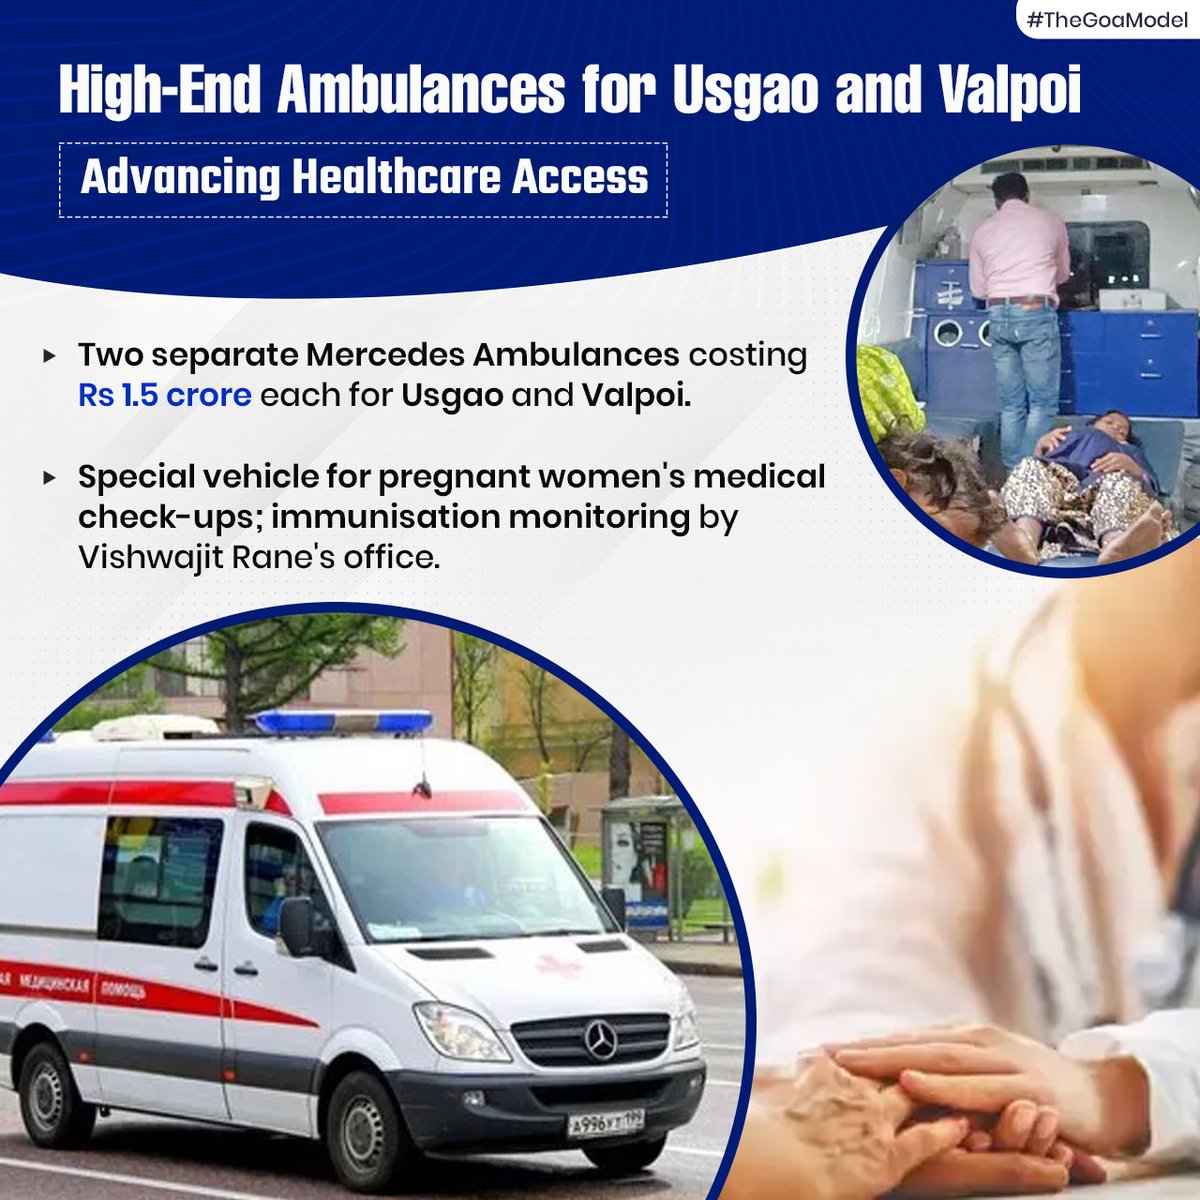 Ushering in a new era of healthcare in Usgao and Valpoi with high-end Mercedes Ambulances at Rs 1.5 crore each. A dedicated focus on maternal and child health reflects our unwavering commitment to accessible and quality healthcare. #TheGoaModel #MercedesAmbulance #GoaHealthcare